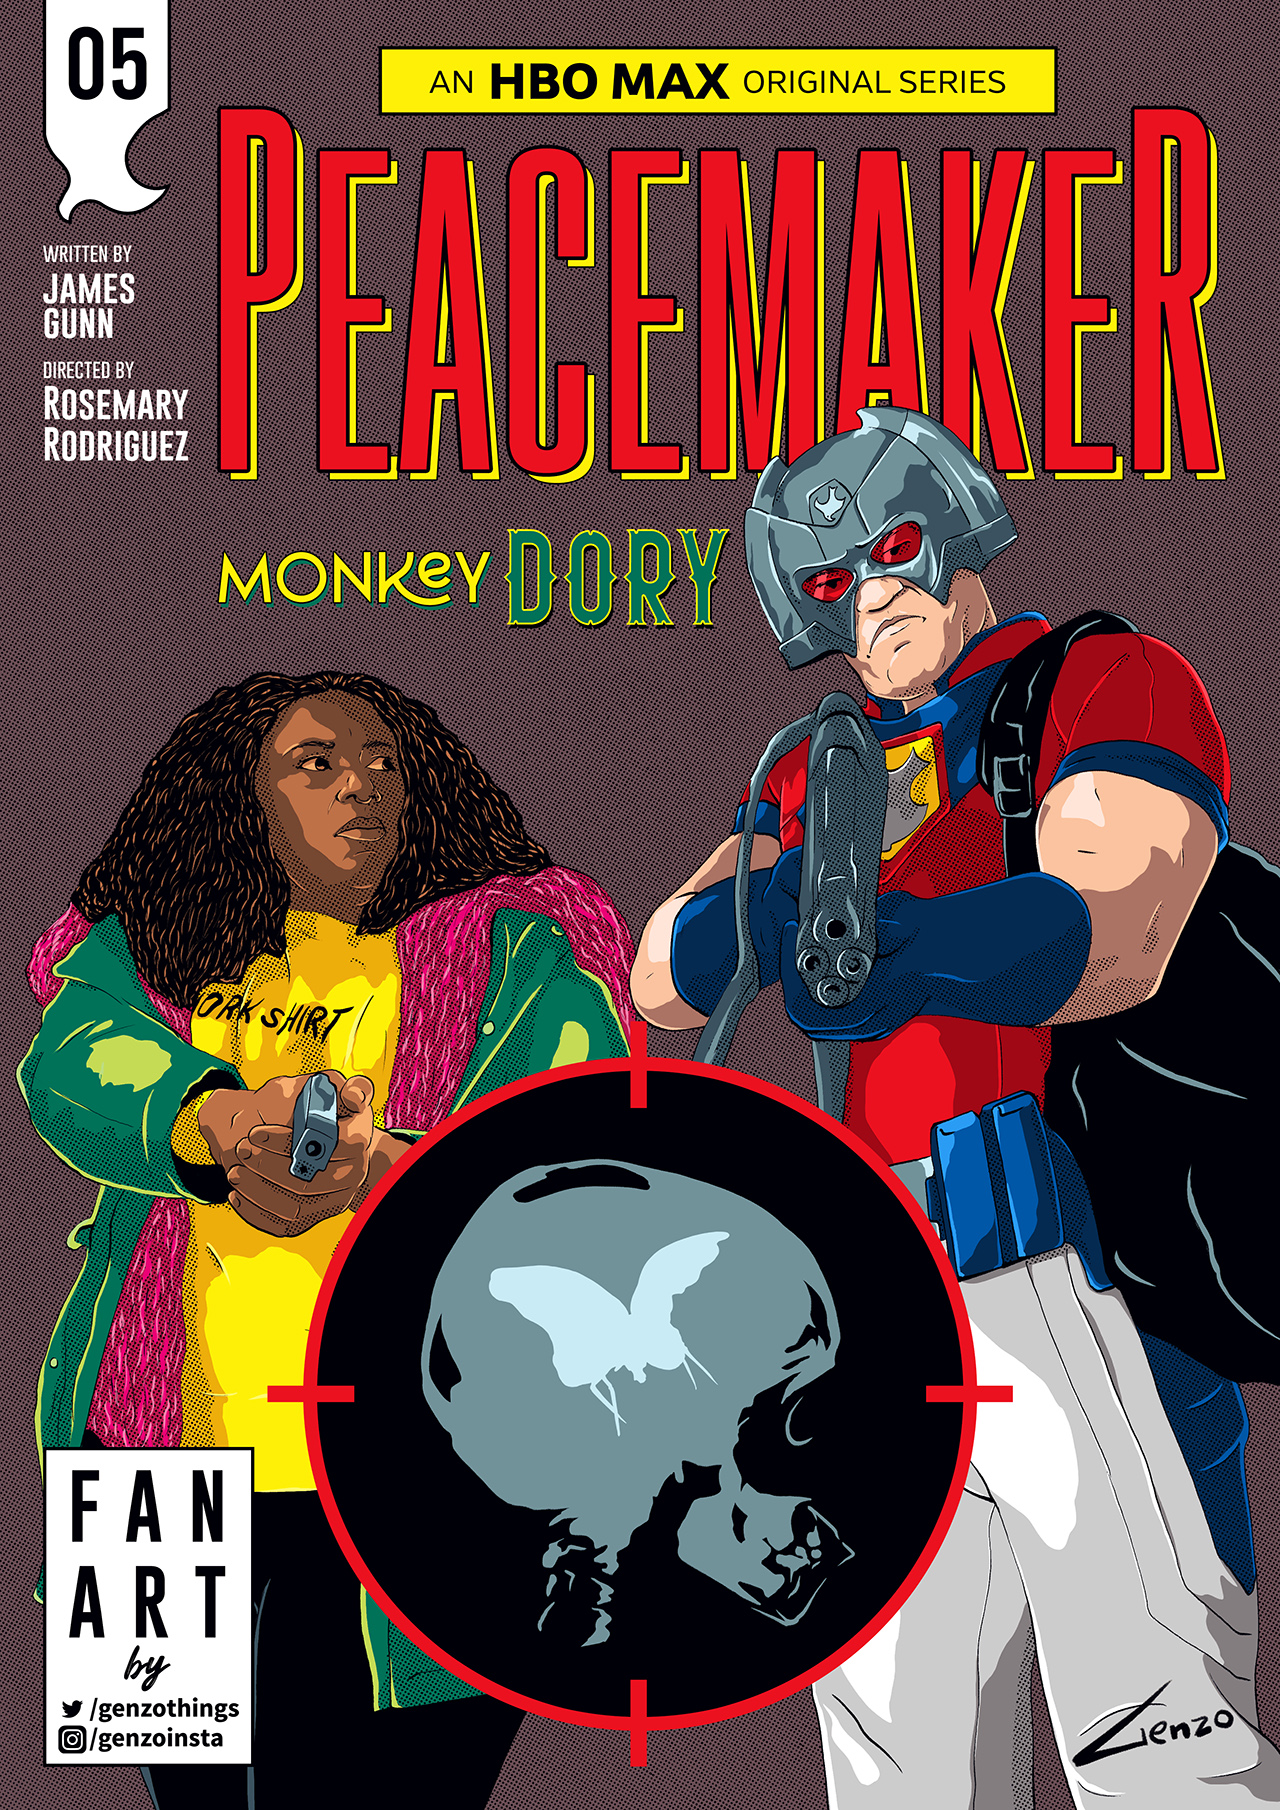 Illustrator pays tribute to every Peacemaker Episode in glorious poster series